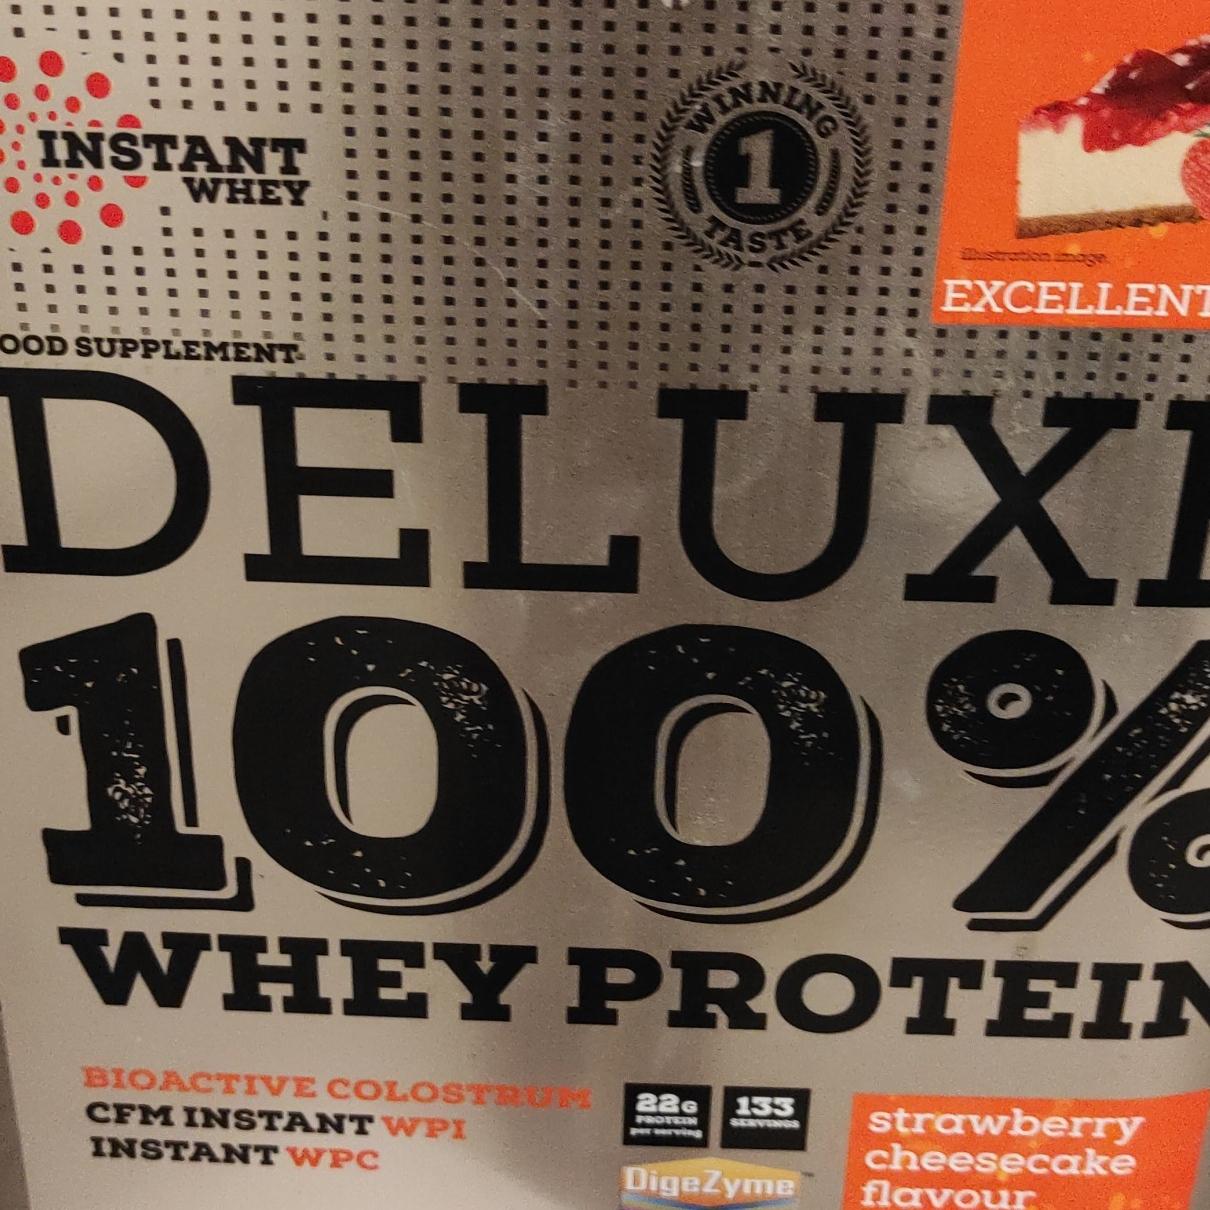 Fotografie - Deluxe 100% Whey protein strawberry cheesecake (jahodový cheesecake) Nutrend